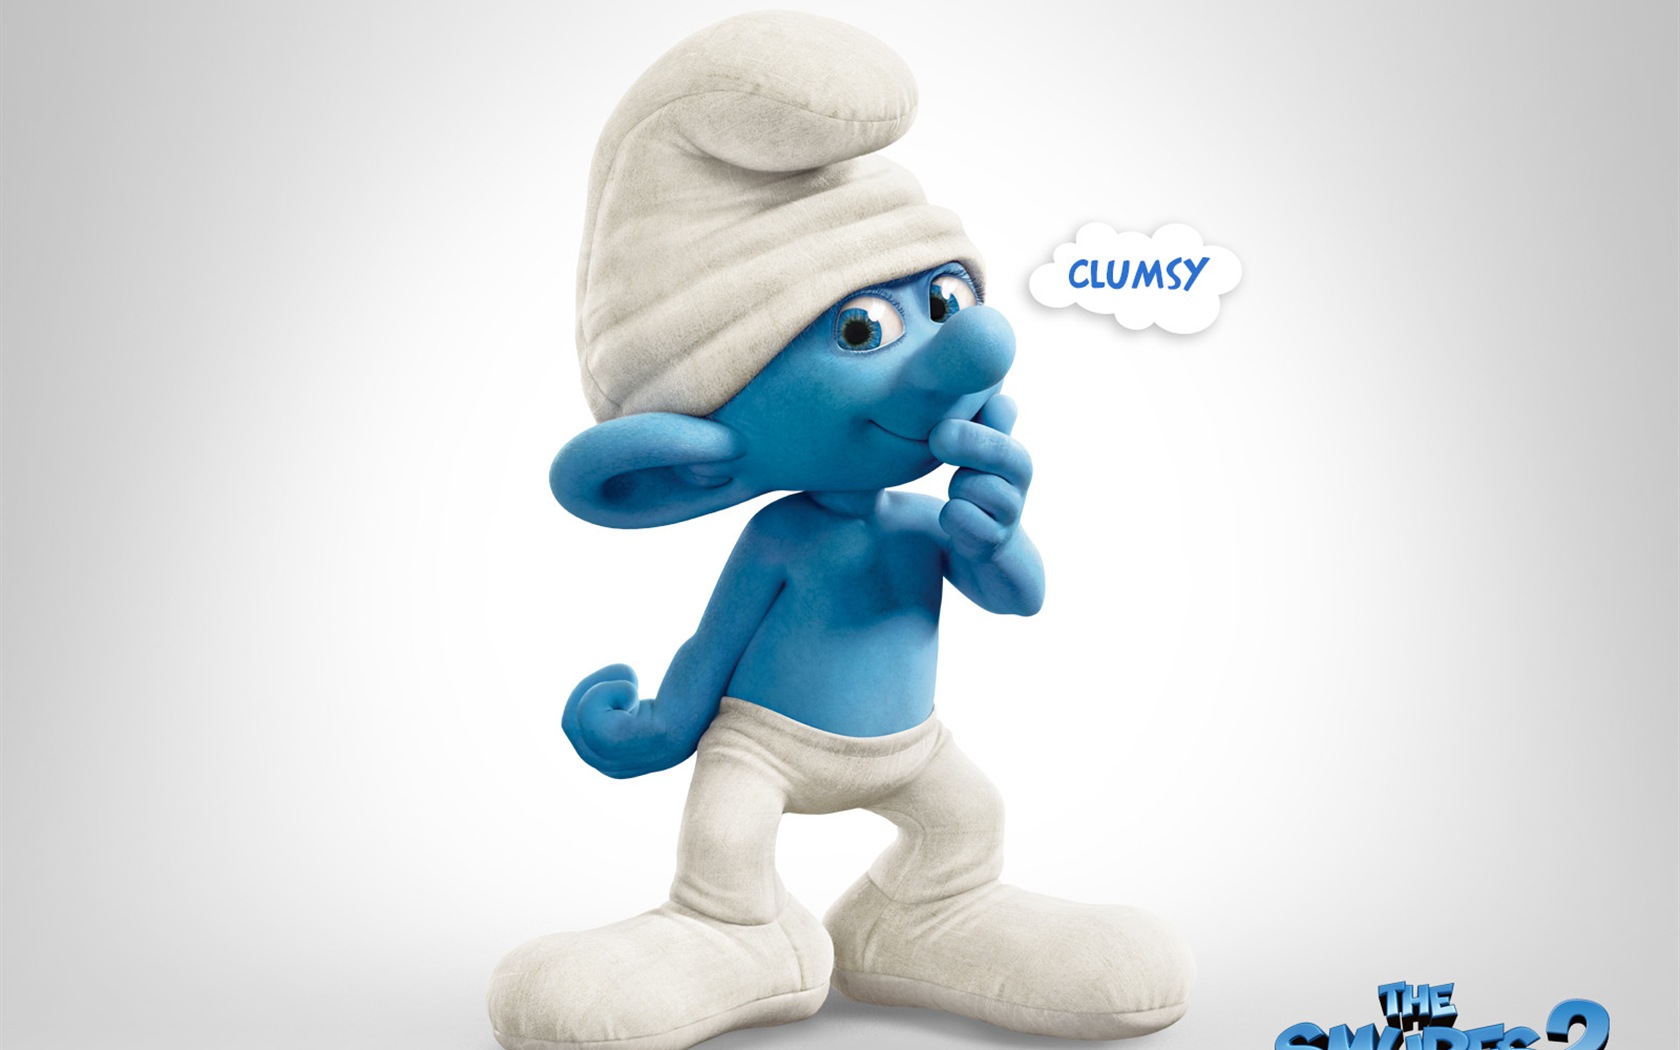 The Smurfs 2 HD movie wallpapers #8 - 1680x1050